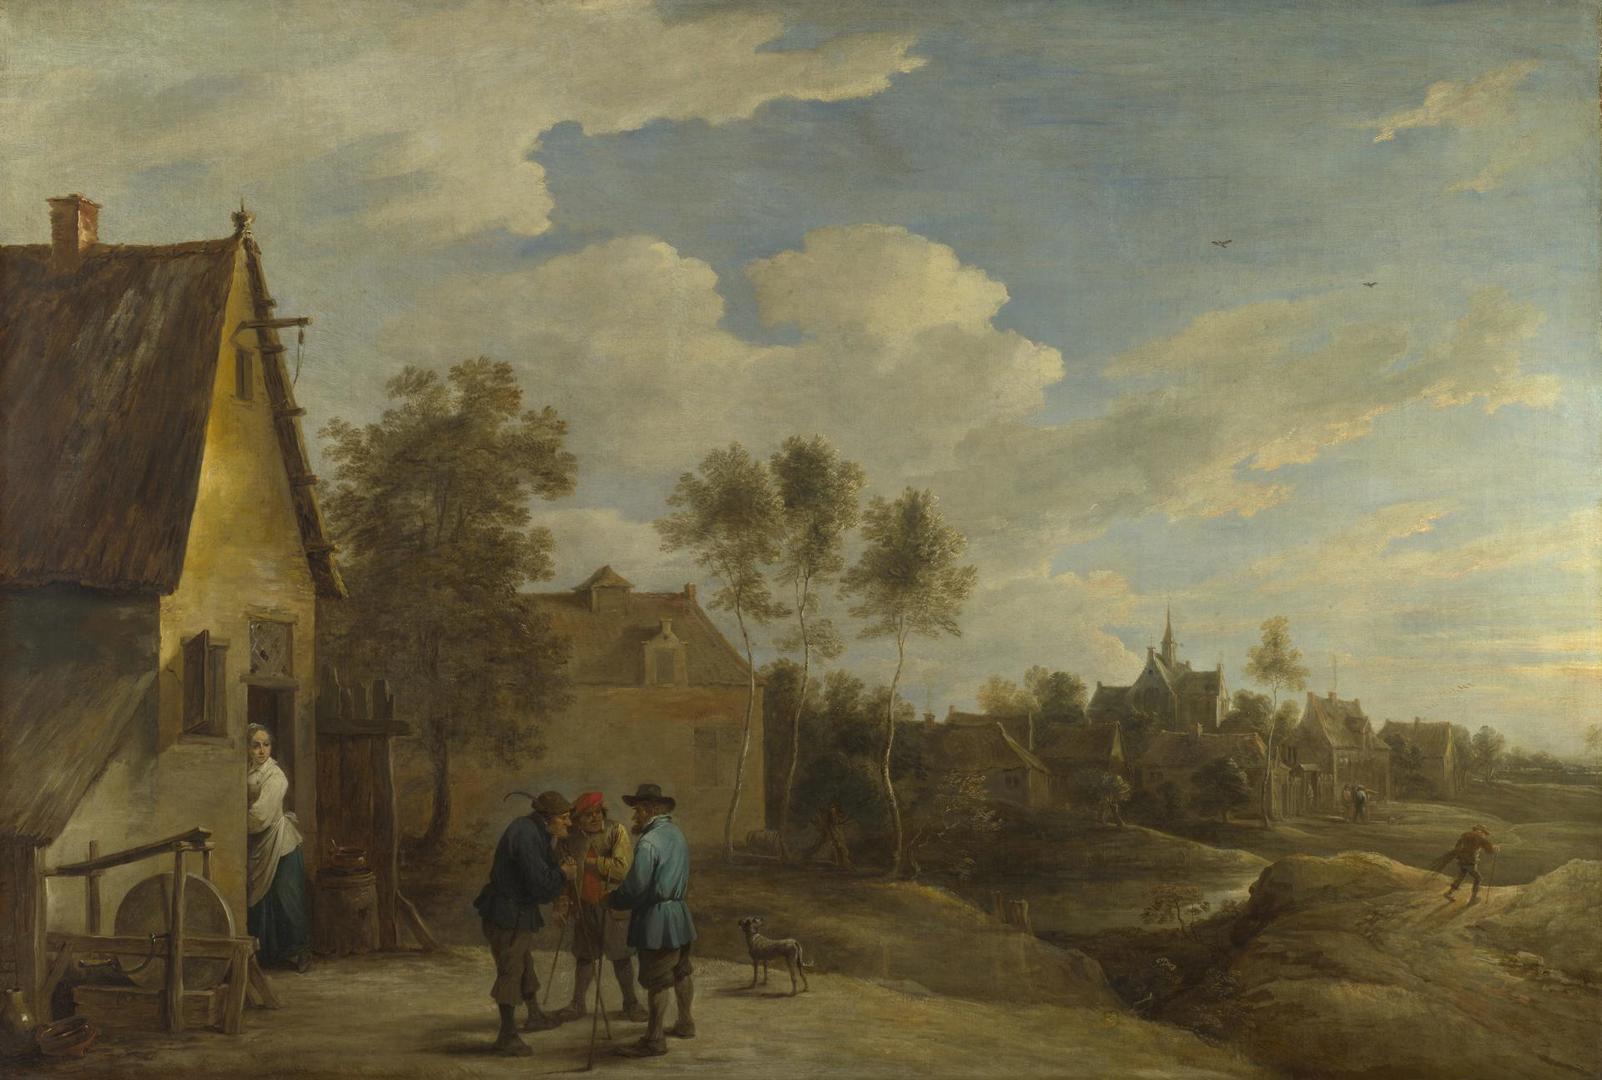 A View of a Village by David Teniers the Younger